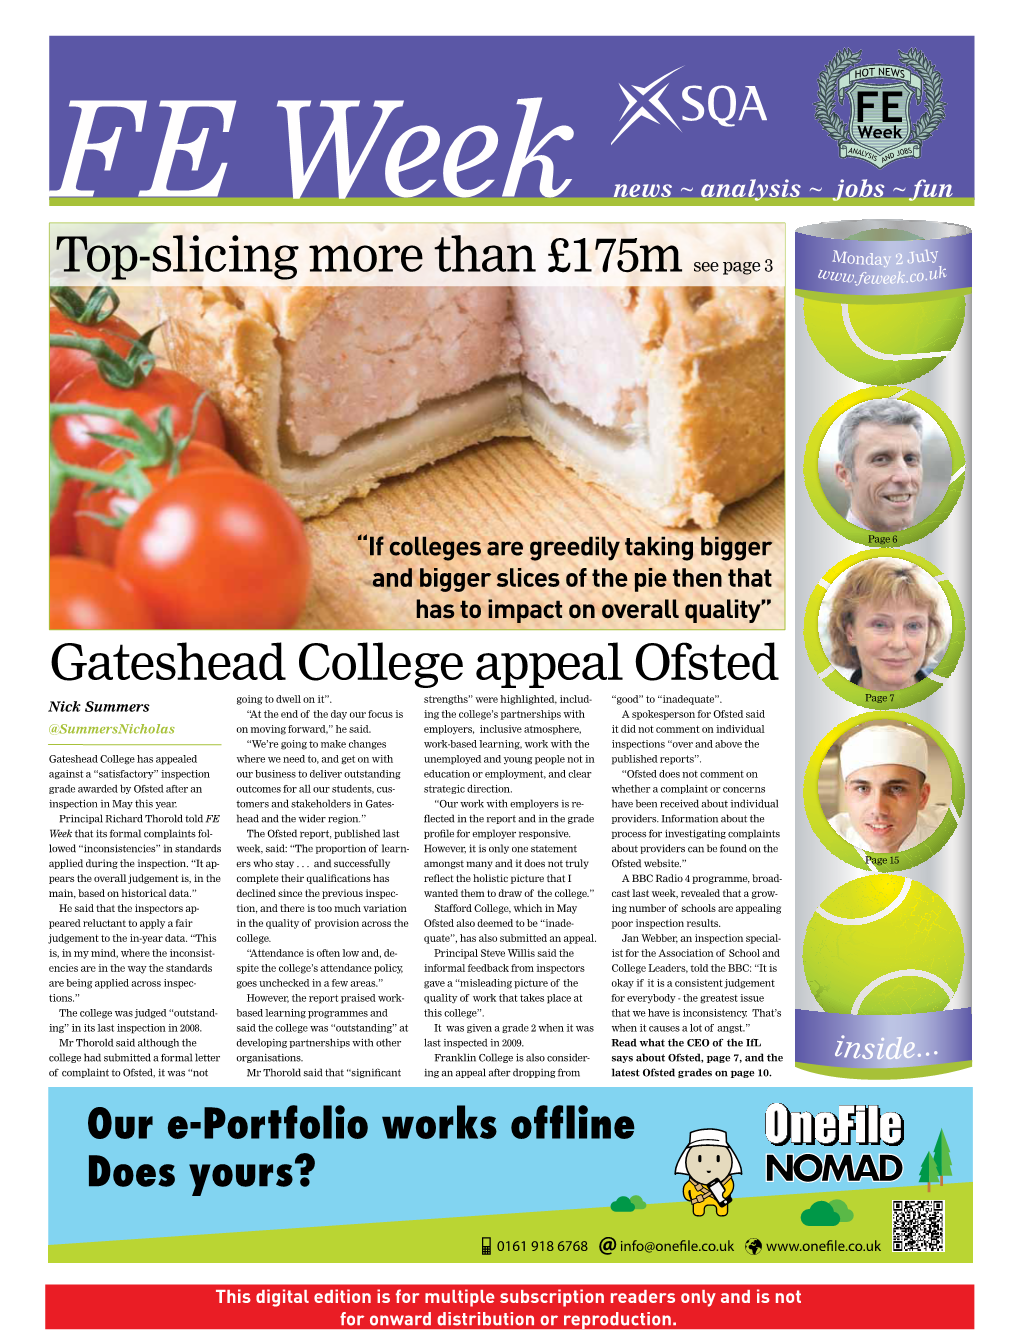 Gateshead College Appeal Ofsted Going to Dwell on It”